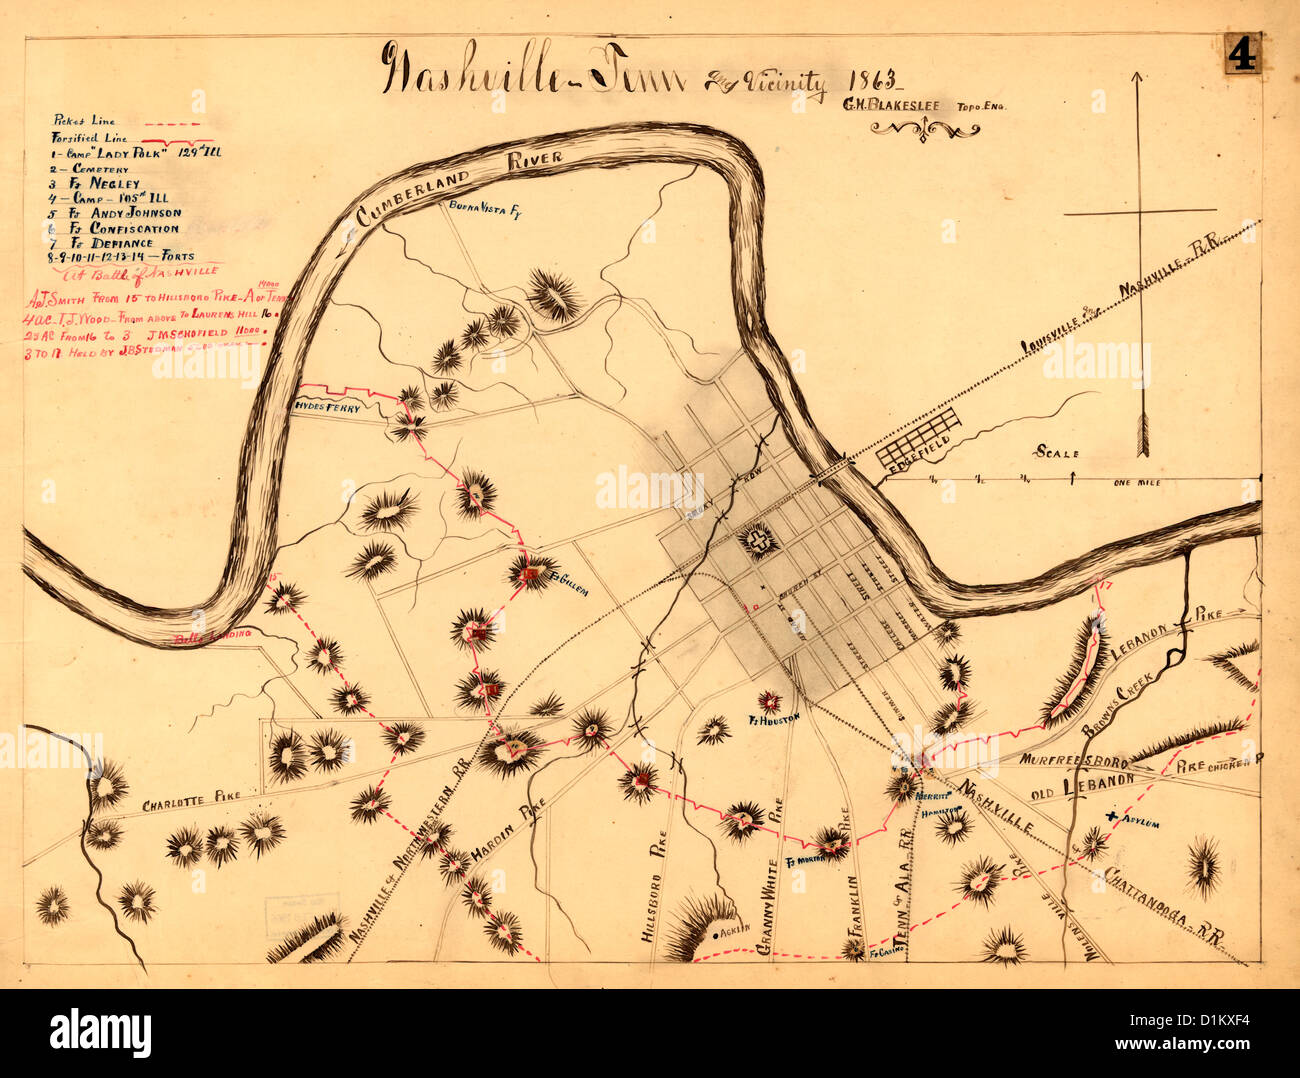 Nashville, Tennessee and vicinity 1863 during USA Civil War Stock Photo